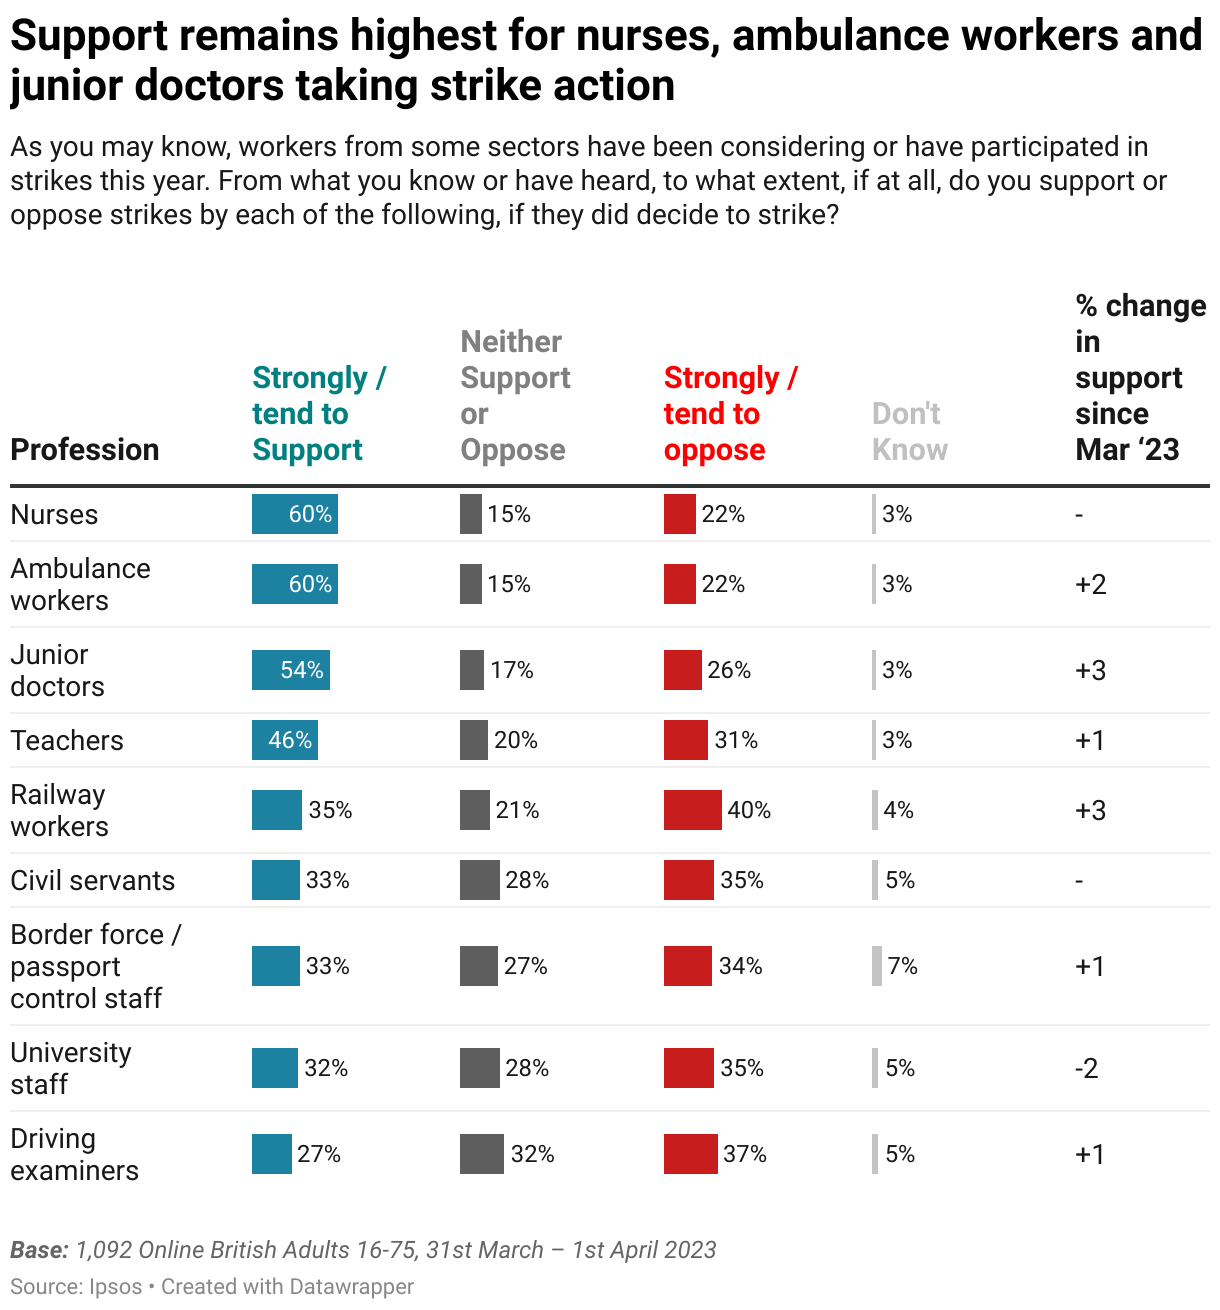 Support remains highest for nurses, ambulance workers and junior doctors taking strike action